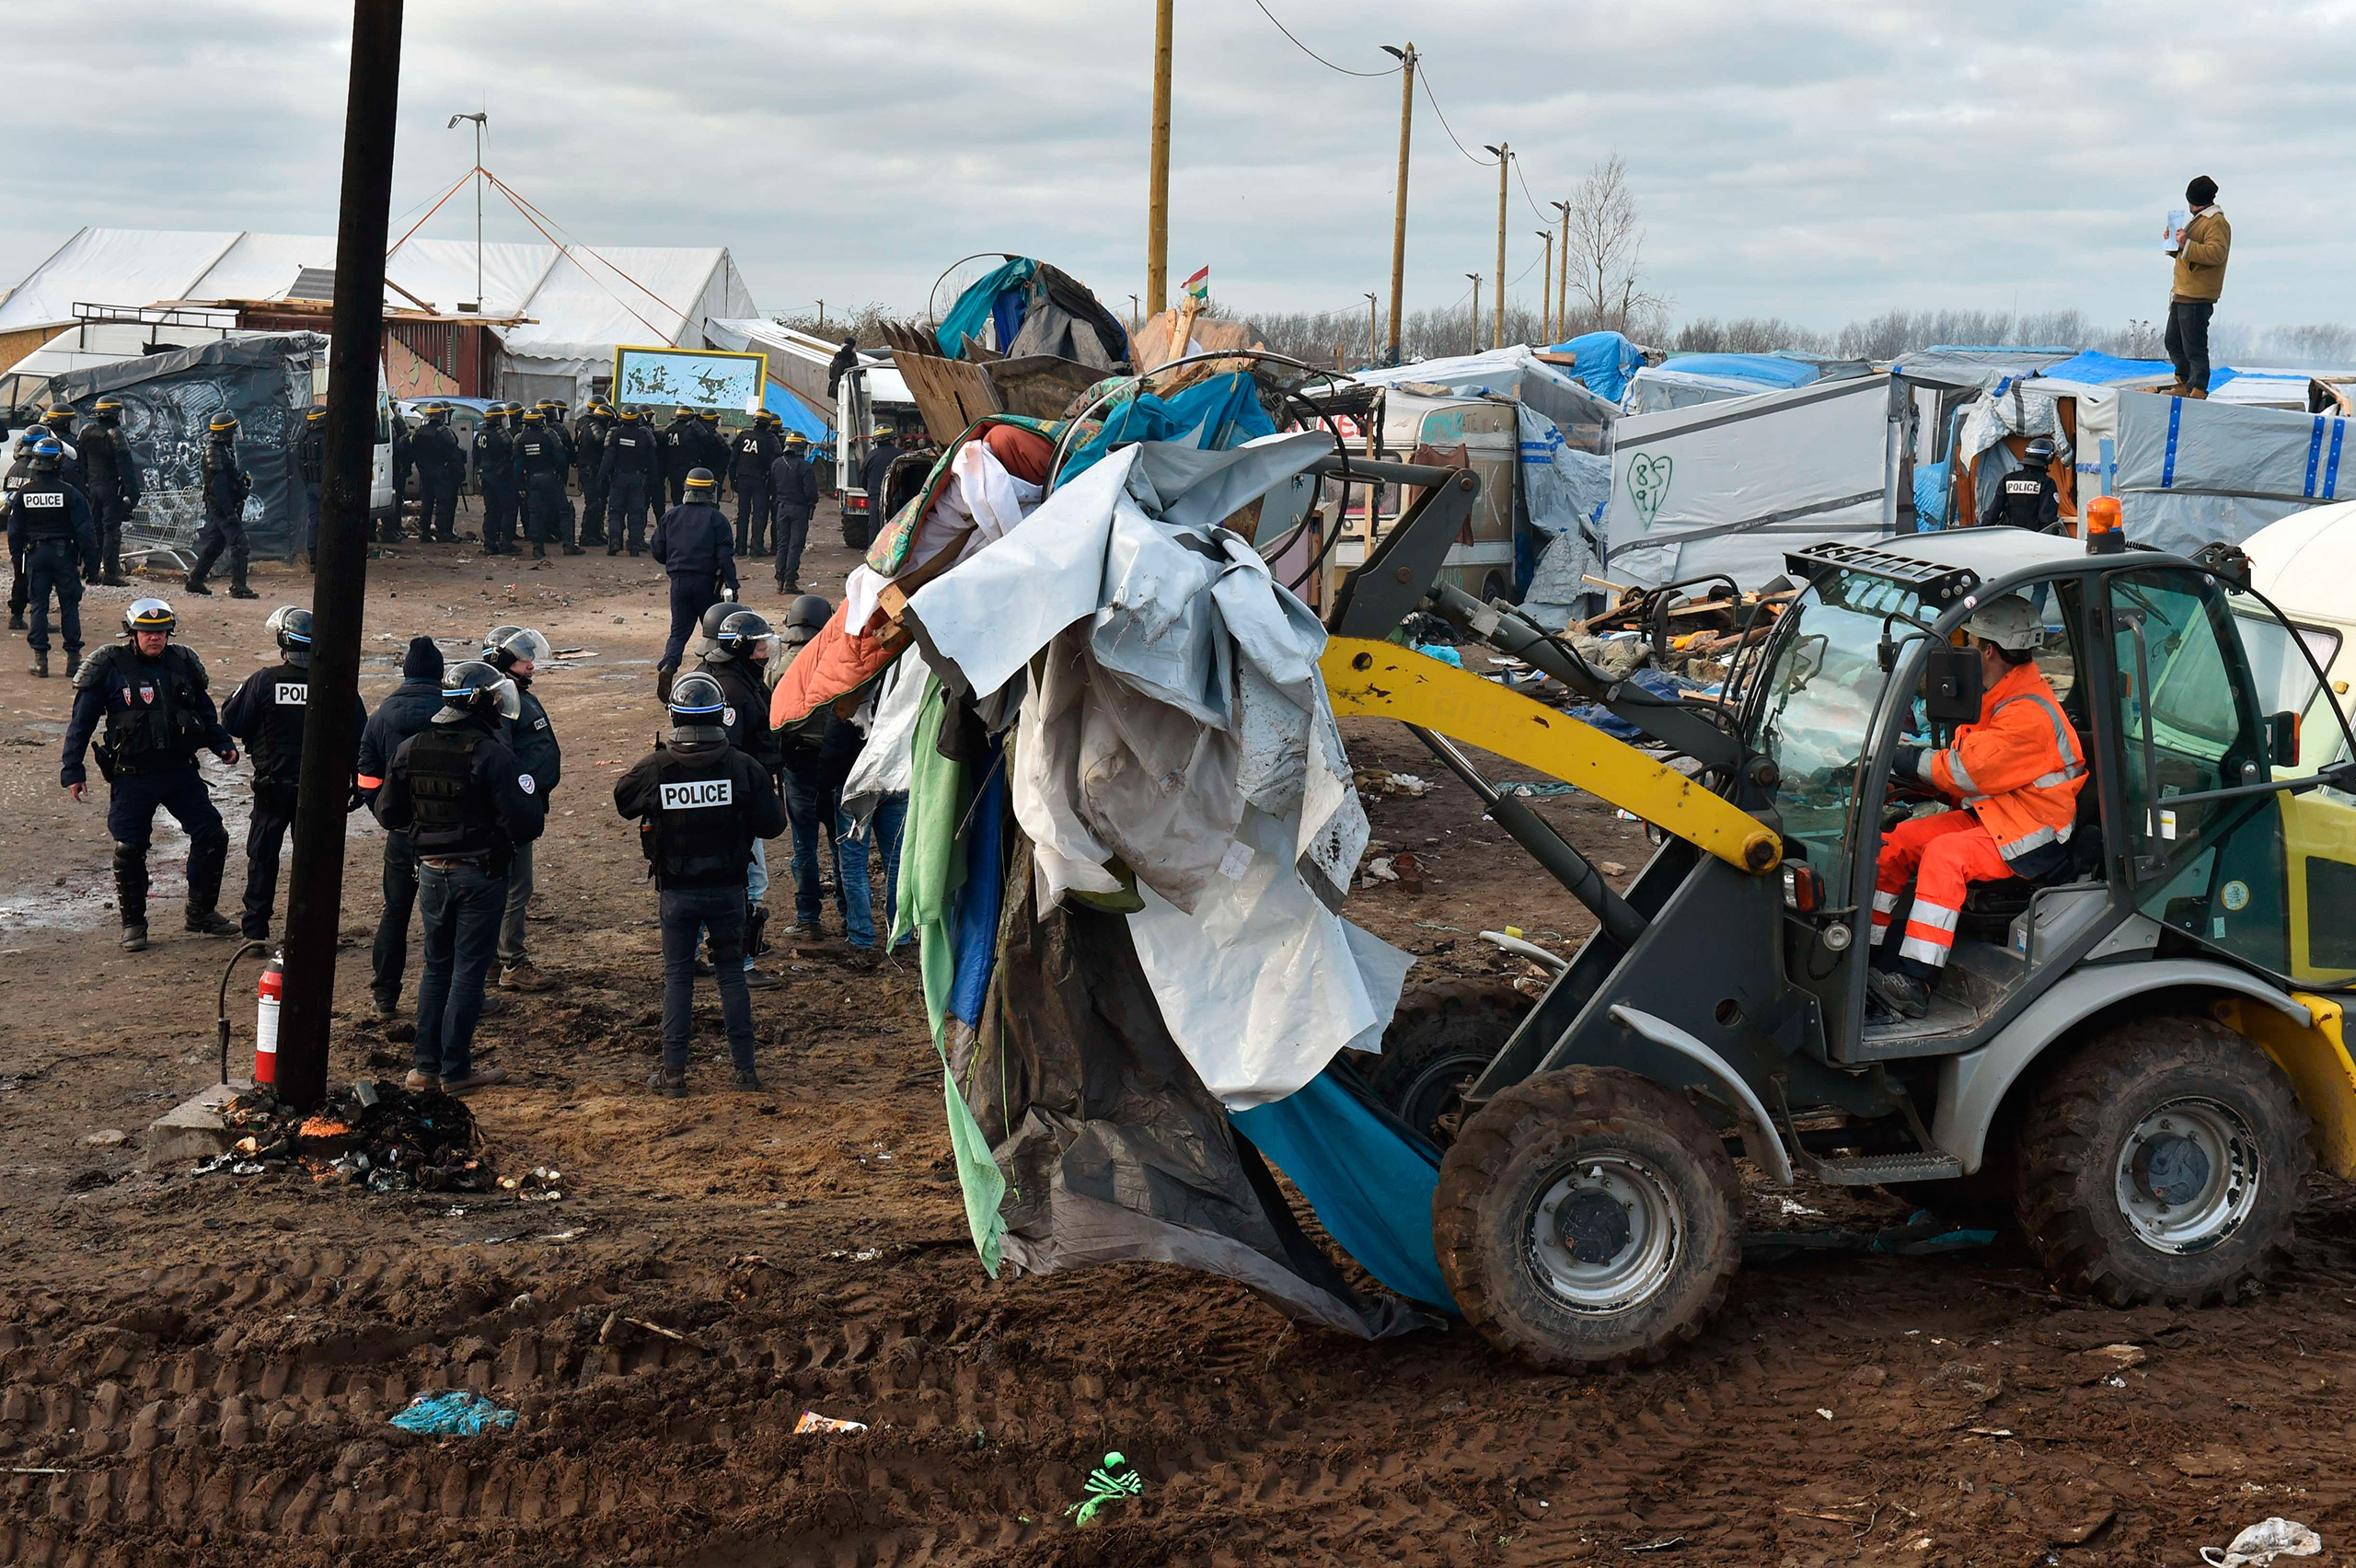 A bulldozer dismantles shelters in the  Jungle  migrant camp in the northern port city of Calais, France, Feb. 29, 2016.